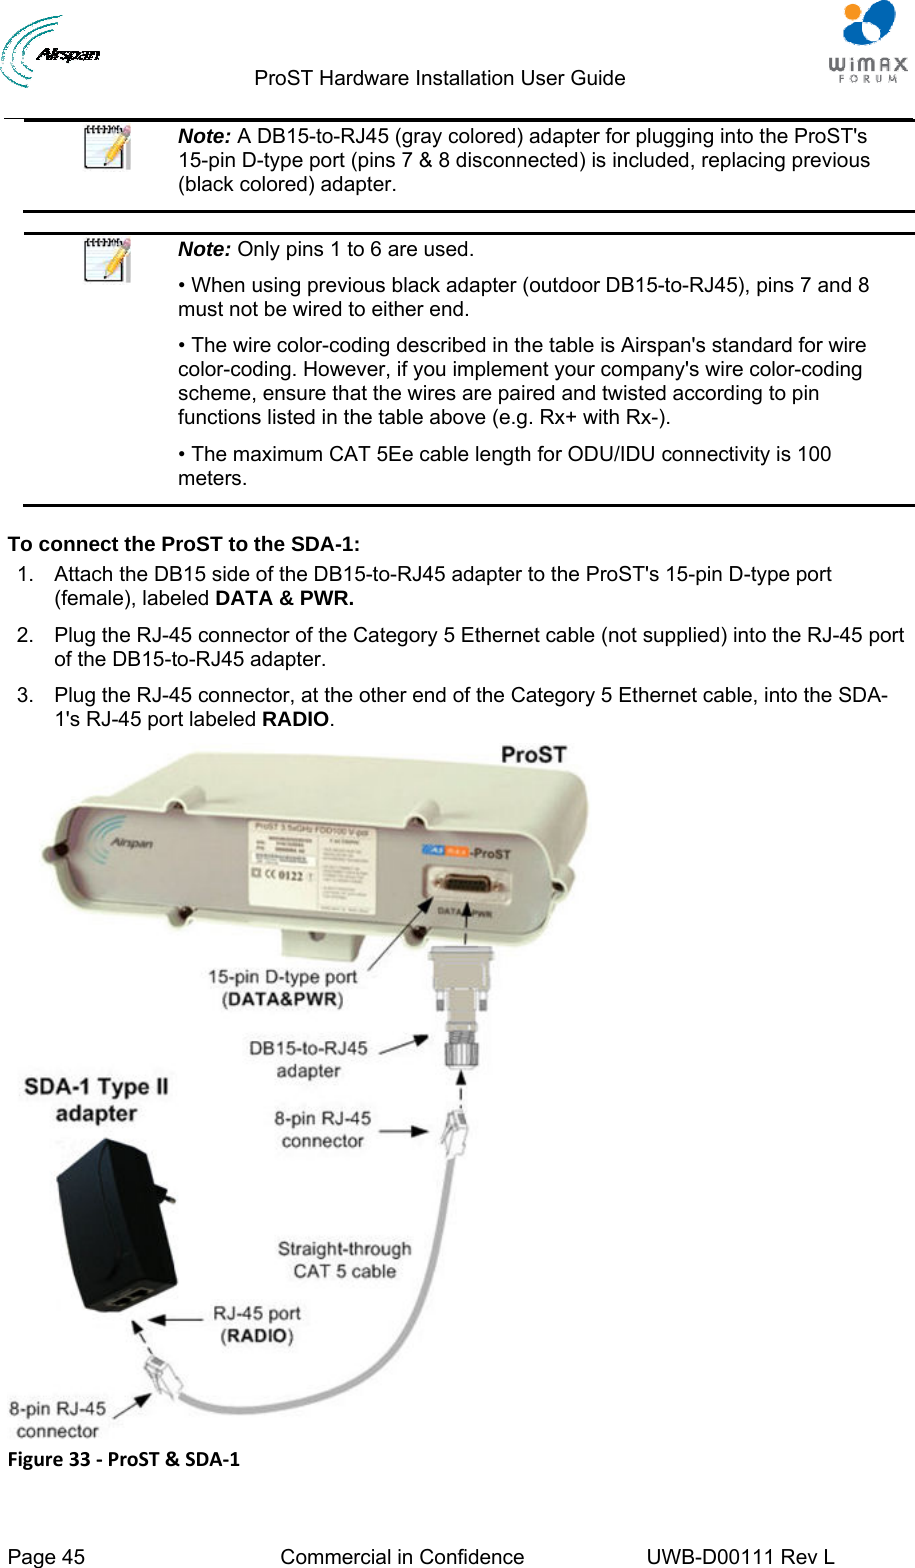                                  ProST Hardware Installation User Guide  Page 45  Commercial in Confidence  UWB-D00111 Rev L    Note: A DB15-to-RJ45 (gray colored) adapter for plugging into the ProST&apos;s 15-pin D-type port (pins 7 &amp; 8 disconnected) is included, replacing previous (black colored) adapter.   Note: Only pins 1 to 6 are used. • When using previous black adapter (outdoor DB15-to-RJ45), pins 7 and 8 must not be wired to either end. • The wire color-coding described in the table is Airspan&apos;s standard for wire color-coding. However, if you implement your company&apos;s wire color-coding scheme, ensure that the wires are paired and twisted according to pin functions listed in the table above (e.g. Rx+ with Rx-). • The maximum CAT 5Ee cable length for ODU/IDU connectivity is 100 meters.  To connect the ProST to the SDA-1: 1.  Attach the DB15 side of the DB15-to-RJ45 adapter to the ProST&apos;s 15-pin D-type port (female), labeled DATA &amp; PWR. 2.  Plug the RJ-45 connector of the Category 5 Ethernet cable (not supplied) into the RJ-45 port of the DB15-to-RJ45 adapter. 3.  Plug the RJ-45 connector, at the other end of the Category 5 Ethernet cable, into the SDA-1&apos;s RJ-45 port labeled RADIO.  Figure33‐ProST&amp;SDA‐1